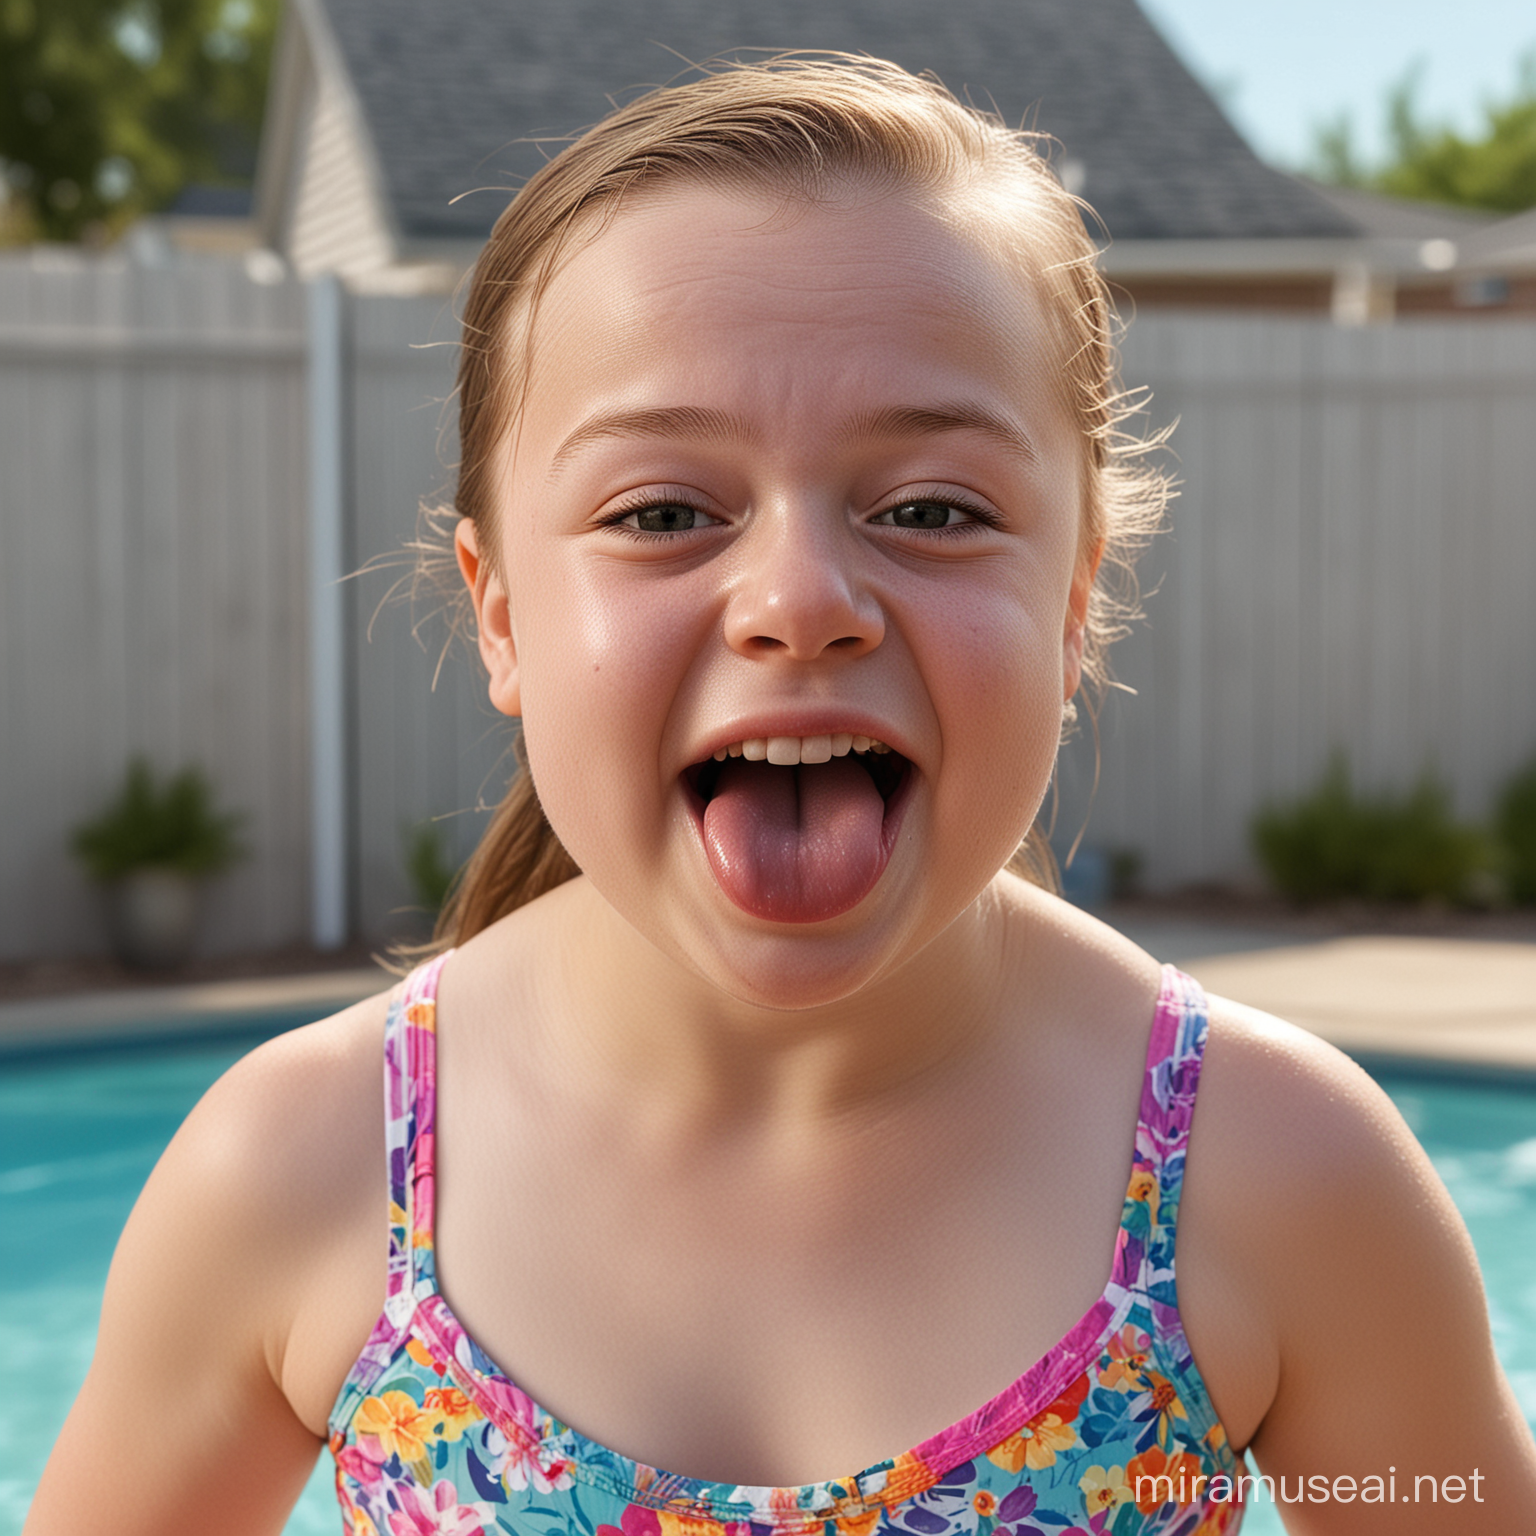 Adorable 11YearOld Girl with Down Syndrome in Swimsuit Enjoying Yard Time